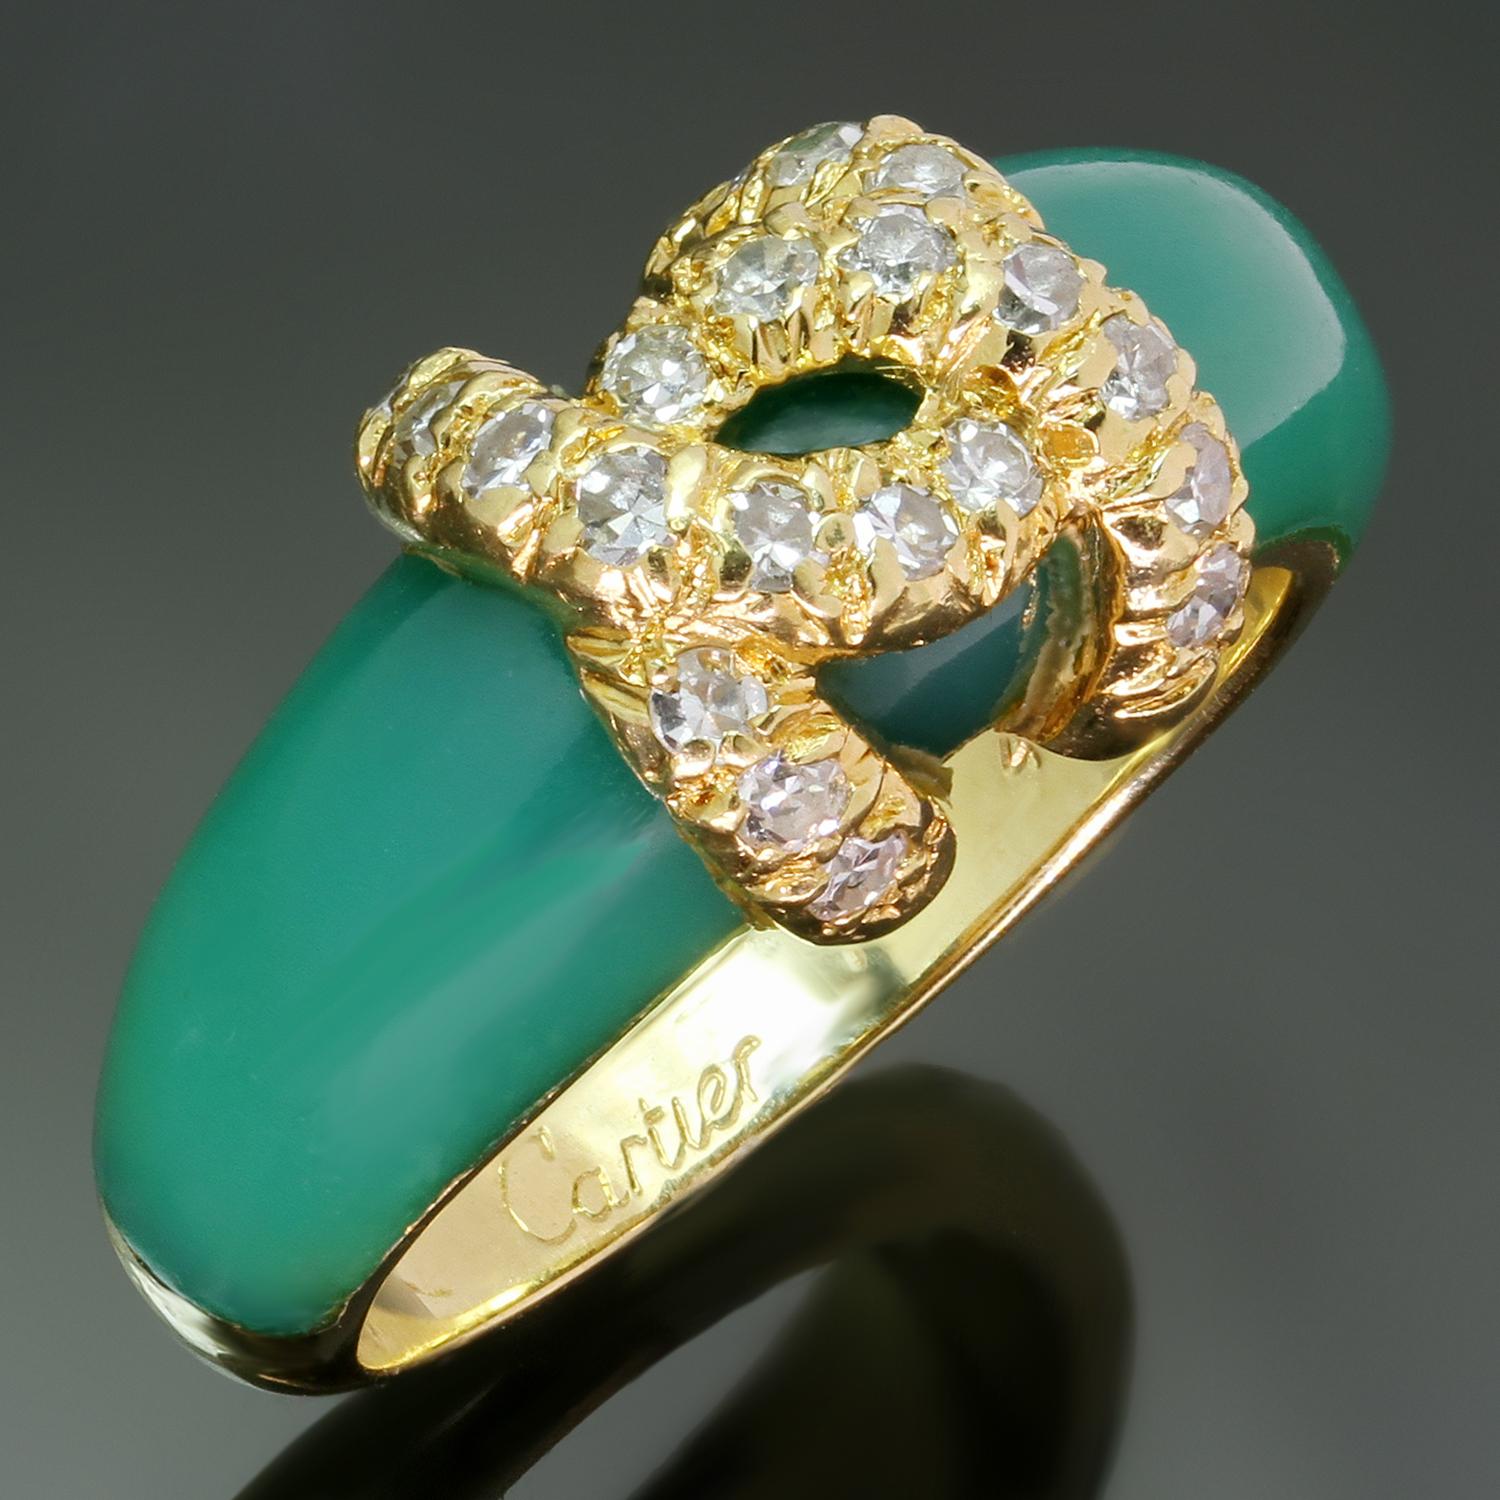 This authentic Cartier ring from the iconic C de Cartier collection is crafted in 18k yellow gold and green rhodochrosite and features a double C logo motif set with 20 round diamonds weighing an estimated 0.25 carats. Made in France circa 1980s.